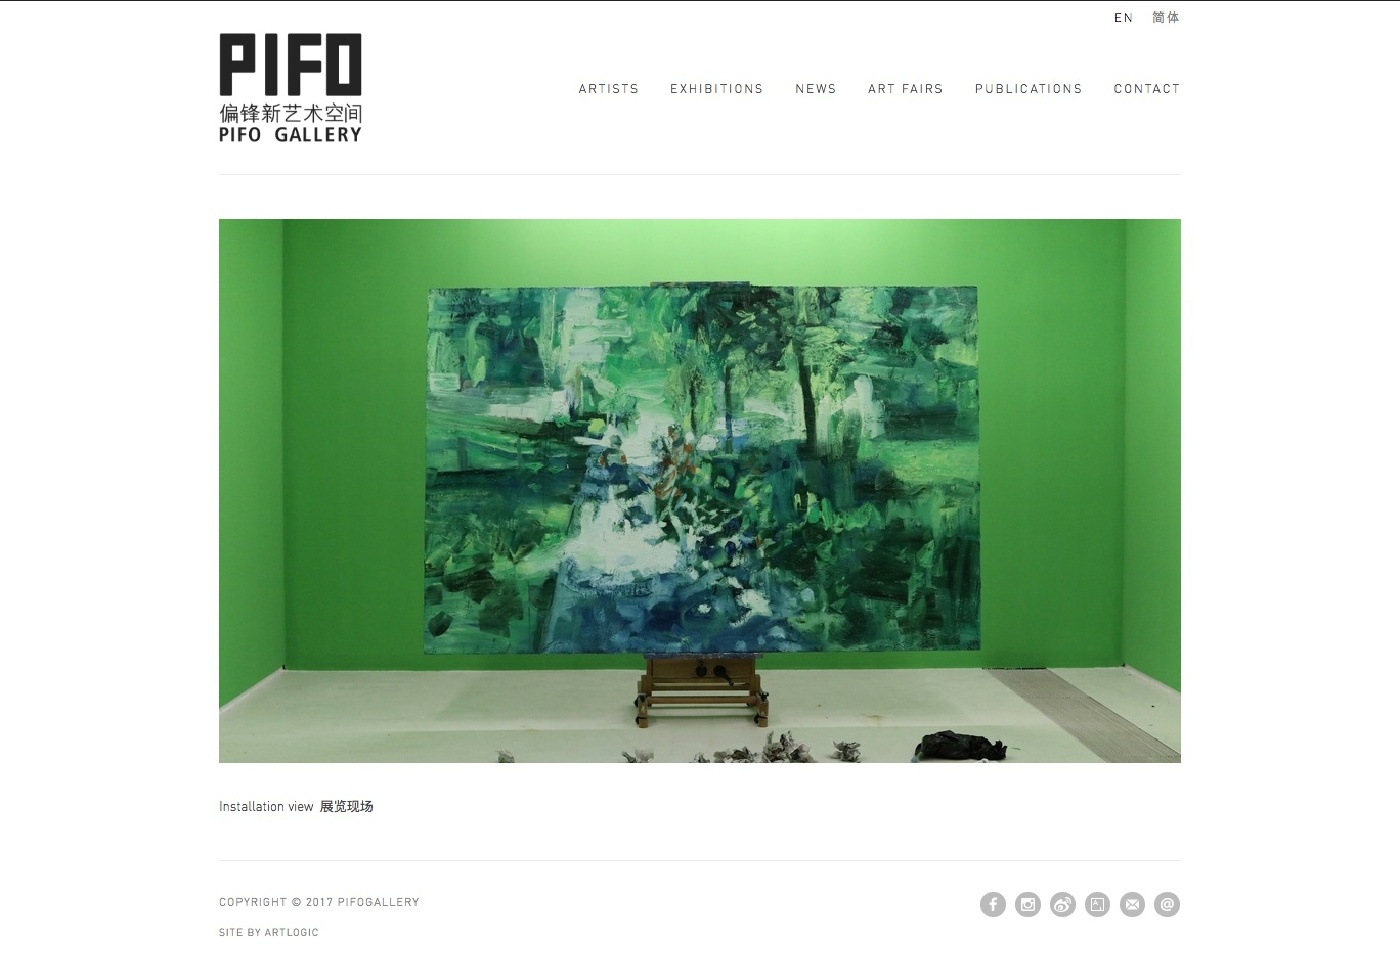 Pifo Gallery